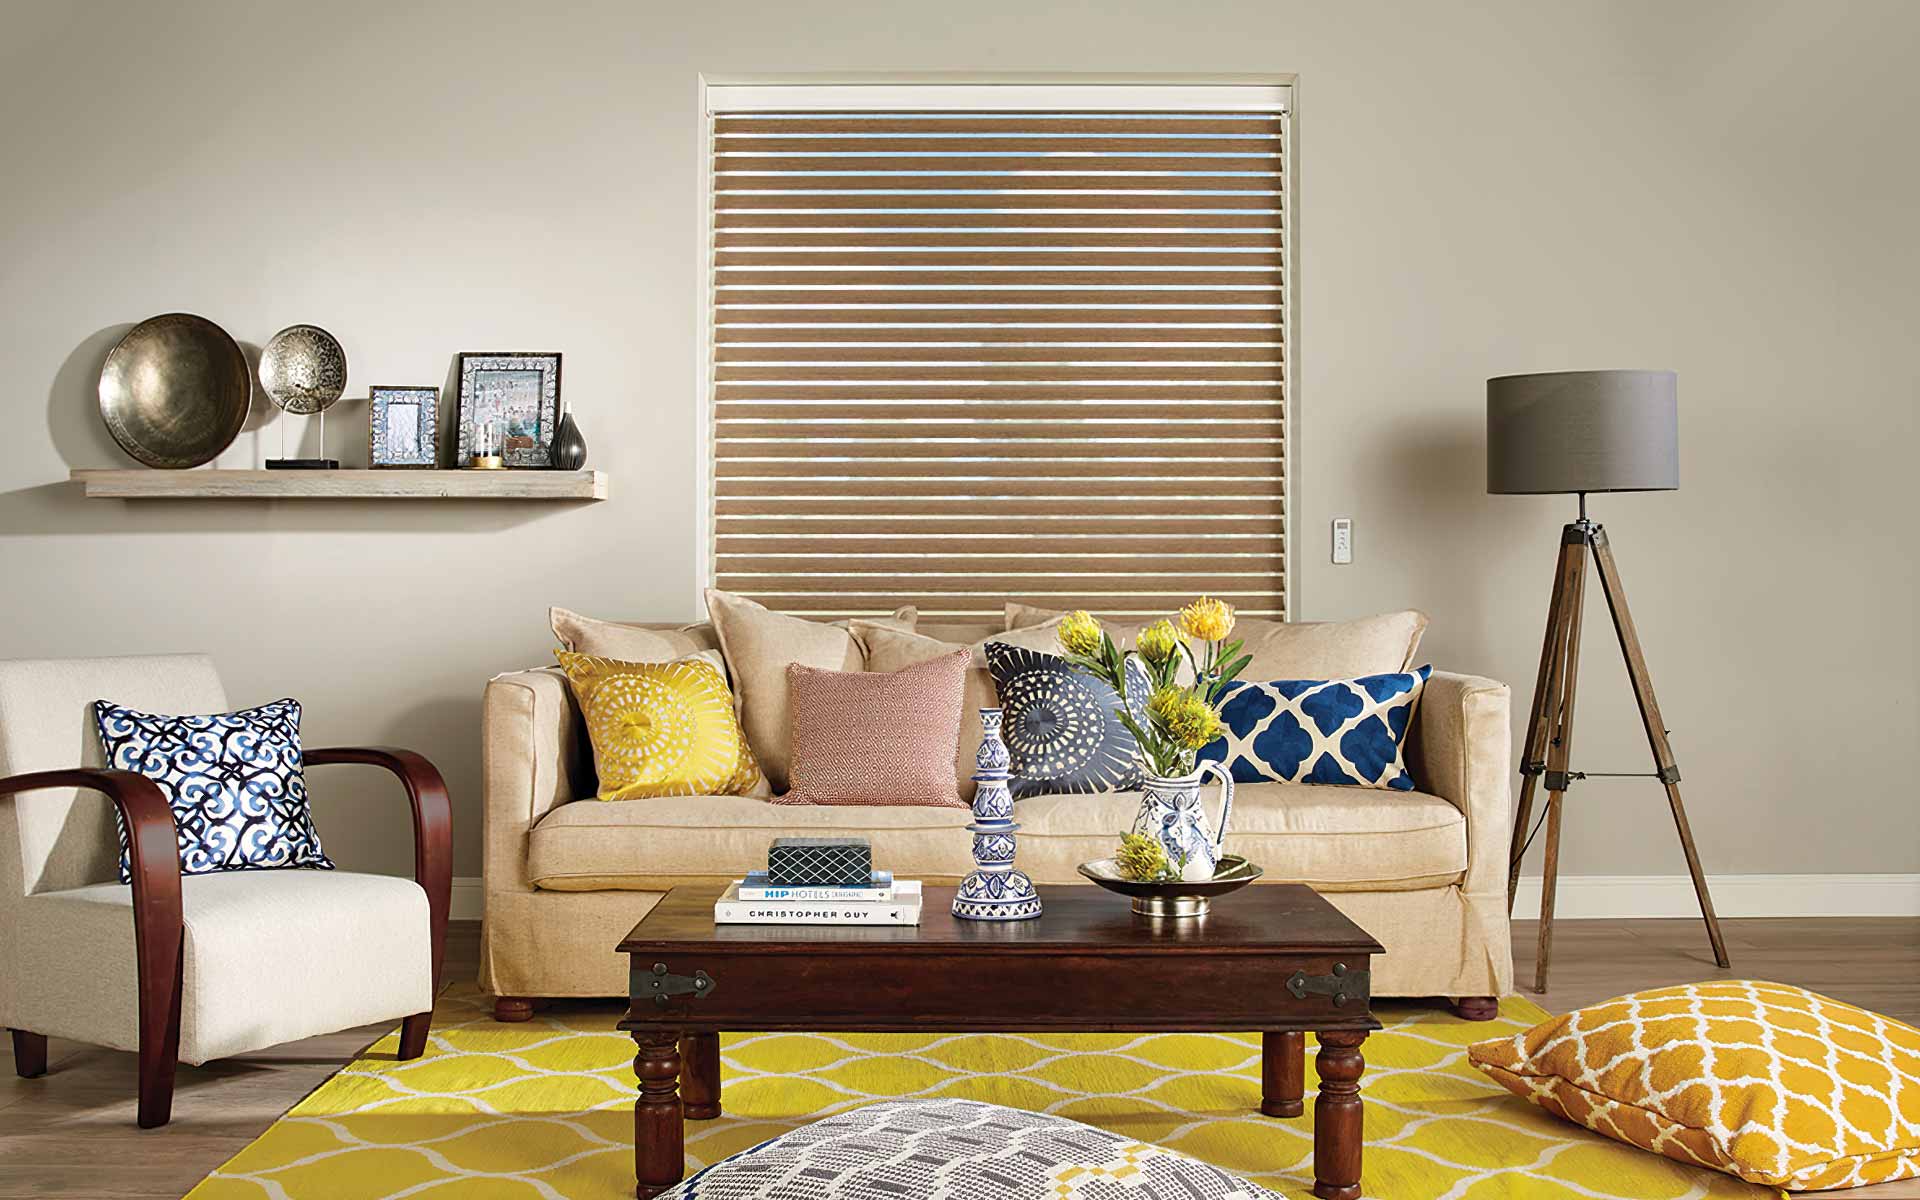 Motorised Blinds and Curtains for your home